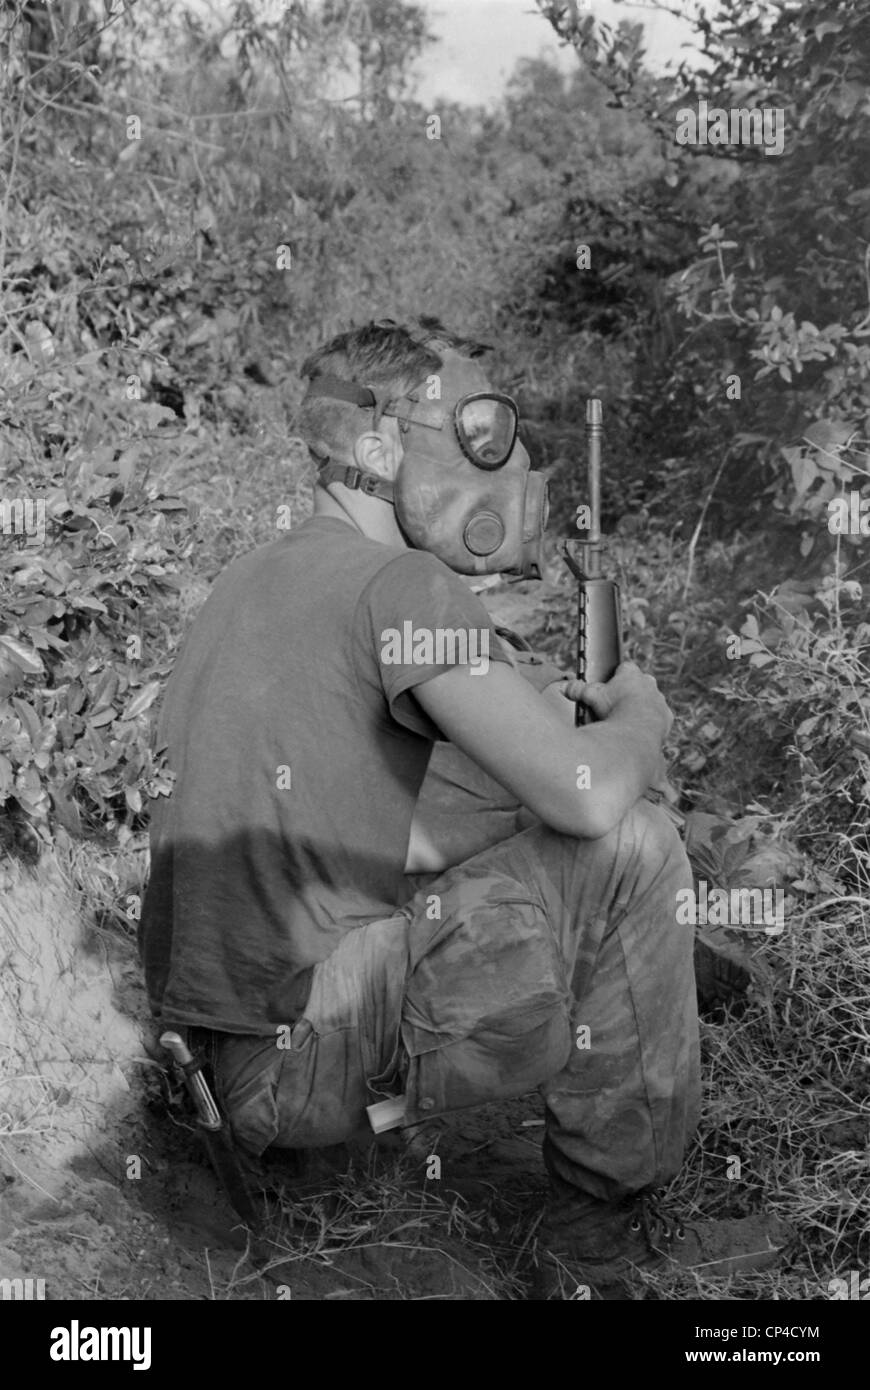 Vietnam War. US Marine wearing gas mask while waiting to enter a Viet Cong tunnel 22 miles south of DaNang, Vietnam. 1968. Stock Photo